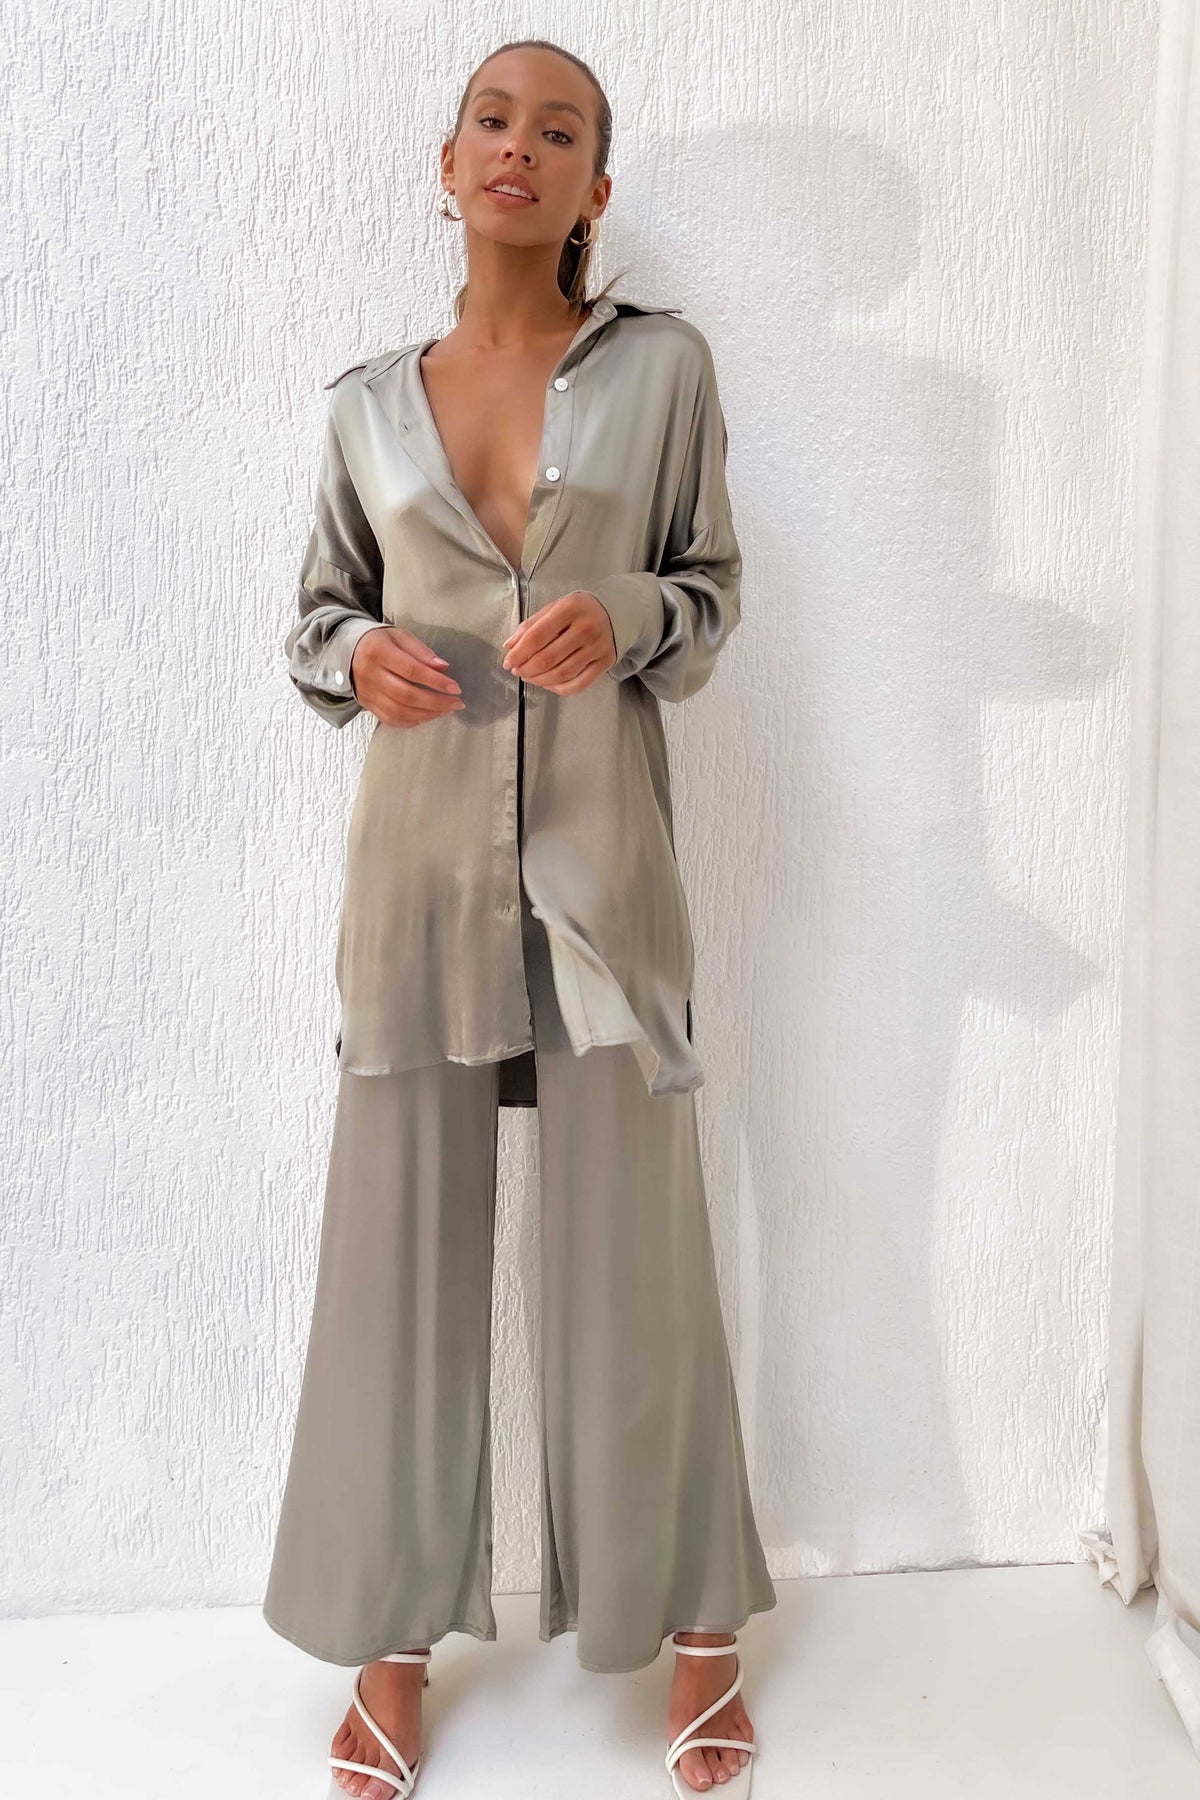 Deania Pants, BOTTOMS, GREEN, new arrivals, PANTS, RAYON, SETS, VISCOSE, , Our New Deania Pants is only $100.00-We Have The Latest Pants | Shorts | Skirts @ Mishkah Online Fashion Boutique-MISHKAH